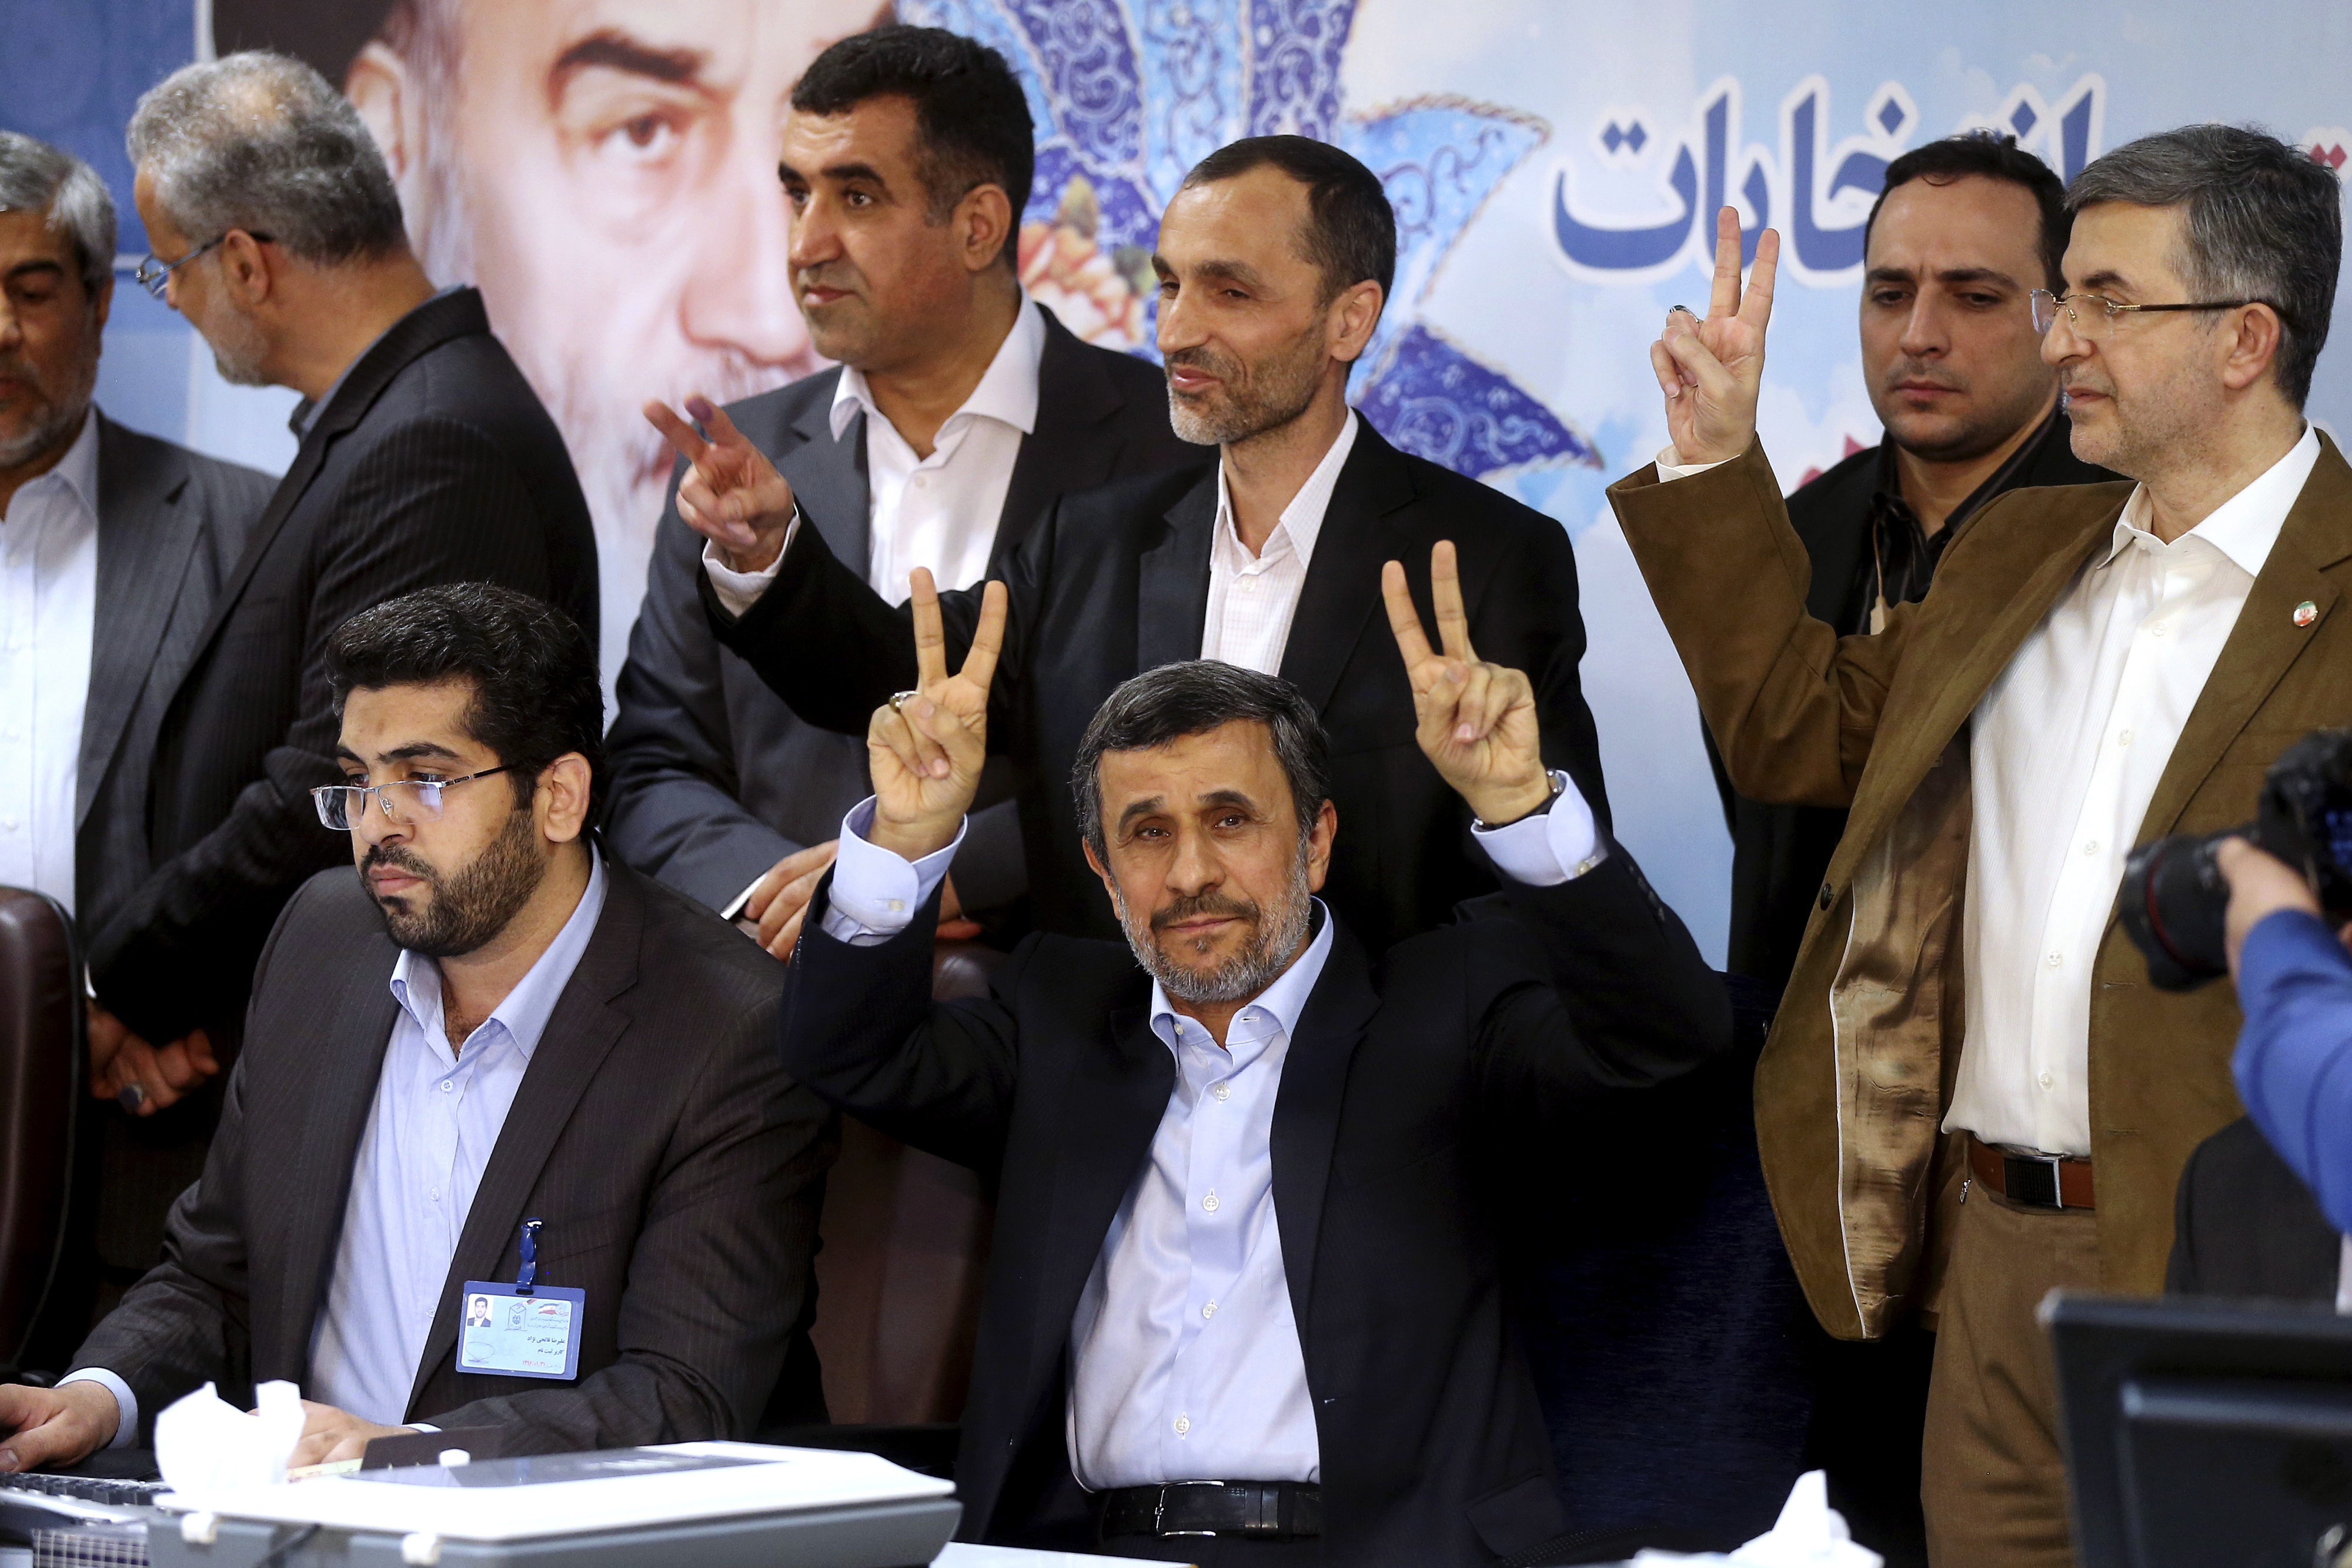 Former Iranian President Mahmoud Ahmadinejad, seated center, flashes the victory sign as he is registering candidacy for the upcoming presidential elections at the Interior Ministry in Tehran, Iran, Wednesday, April 12, 2017. Ahmadinejad on Wednesday unexpectedly filed to run in the country's May presidential election, contradicting a recommendation from the supreme leader to stay out of the race. (AP Photo/Ebrahim Noroozi)